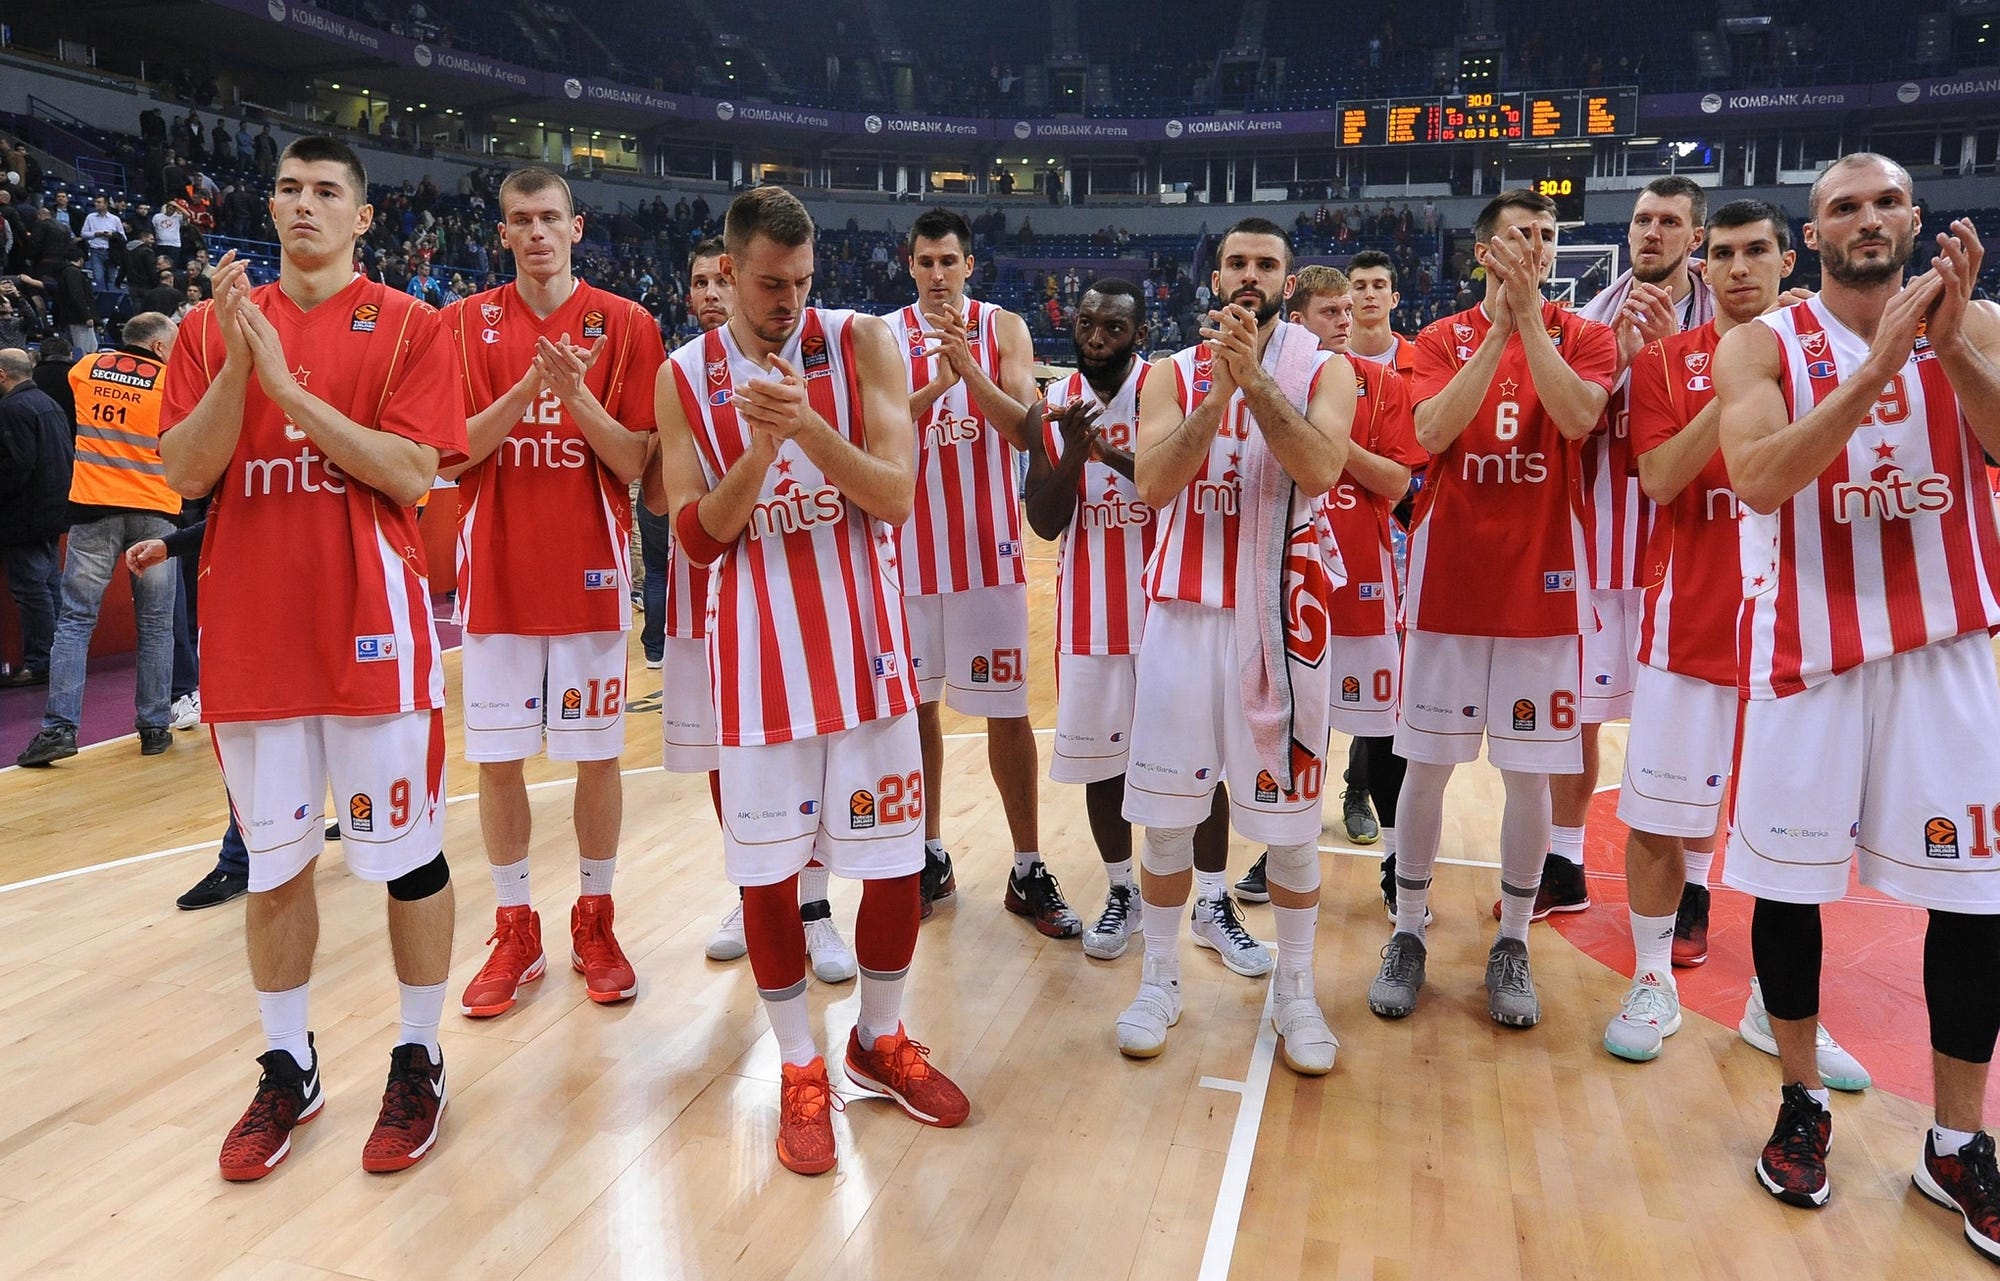 All rise! Its time to give Crvena Zvezda a standing ovation by Stefanos Triantafyllos Medium